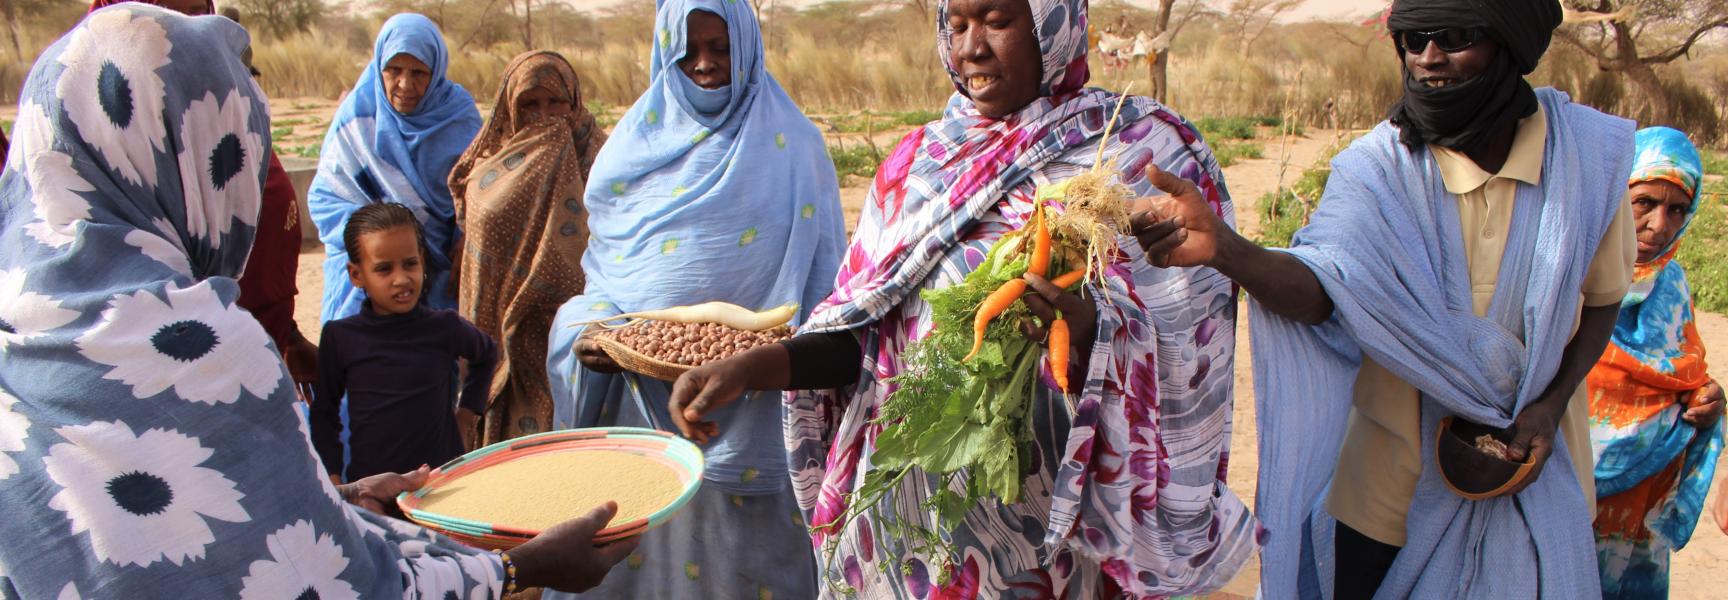 Women selling vegetables and seeds at the Tintane market, Hodh Ech Chargui region, eastern Mauritania